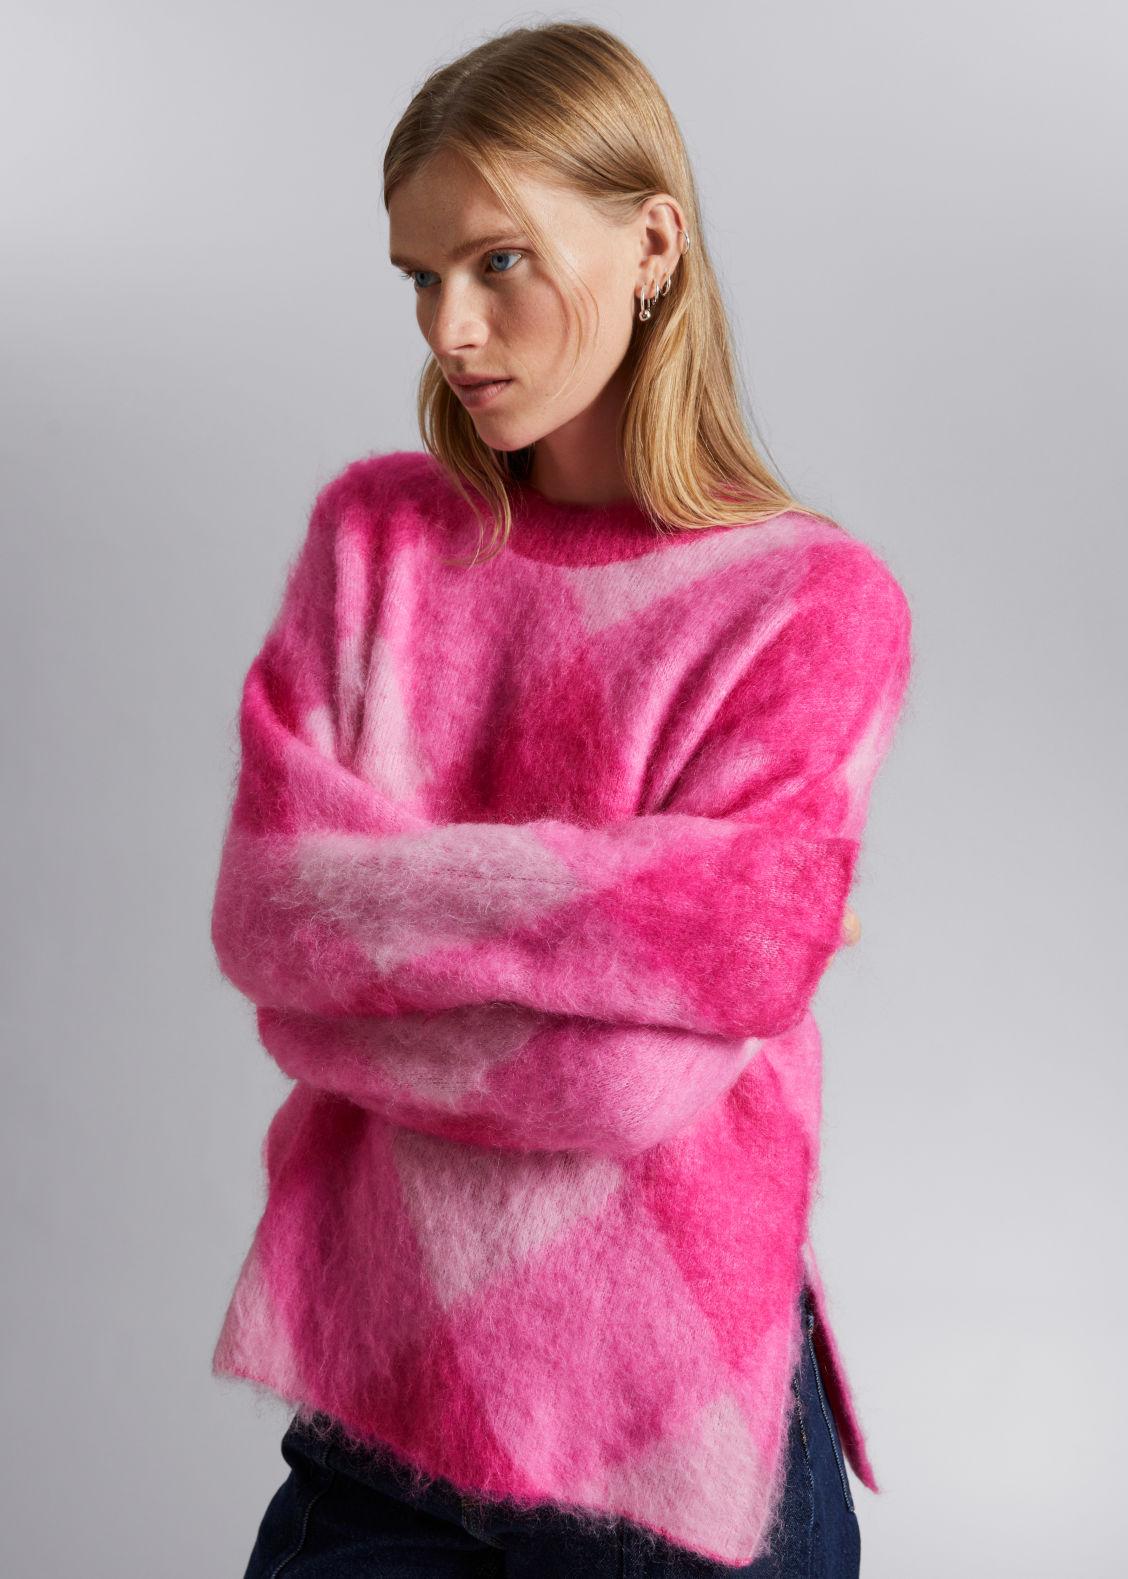 & Other Stories Diagonal Plaid Mohair Sweater in Pink | Lyst